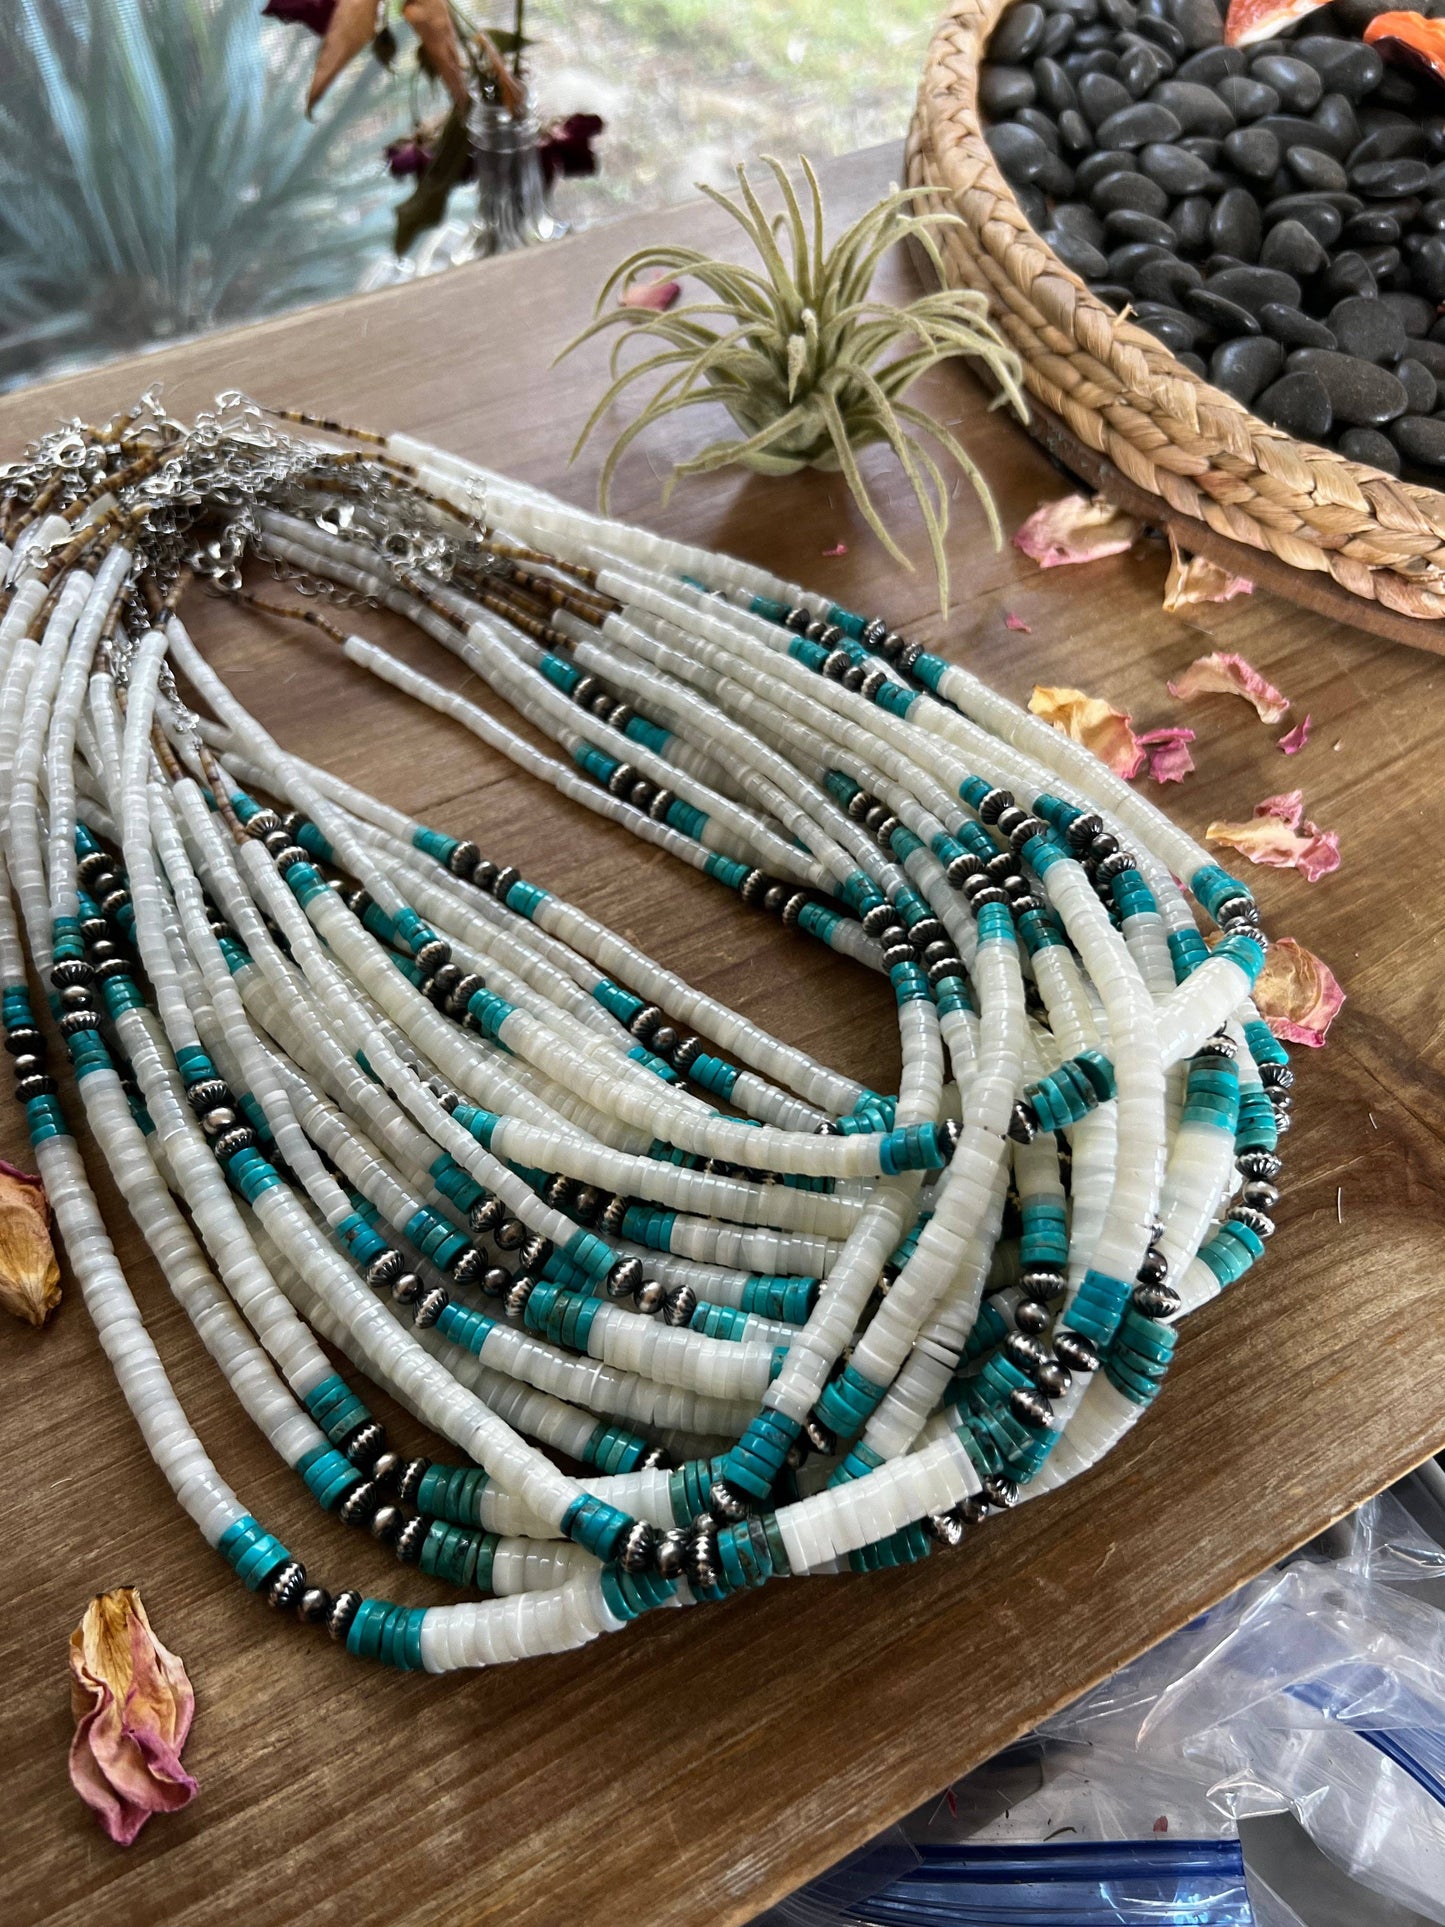 Graduated shell with Navajos turquoise or spiny: Spiny oyster